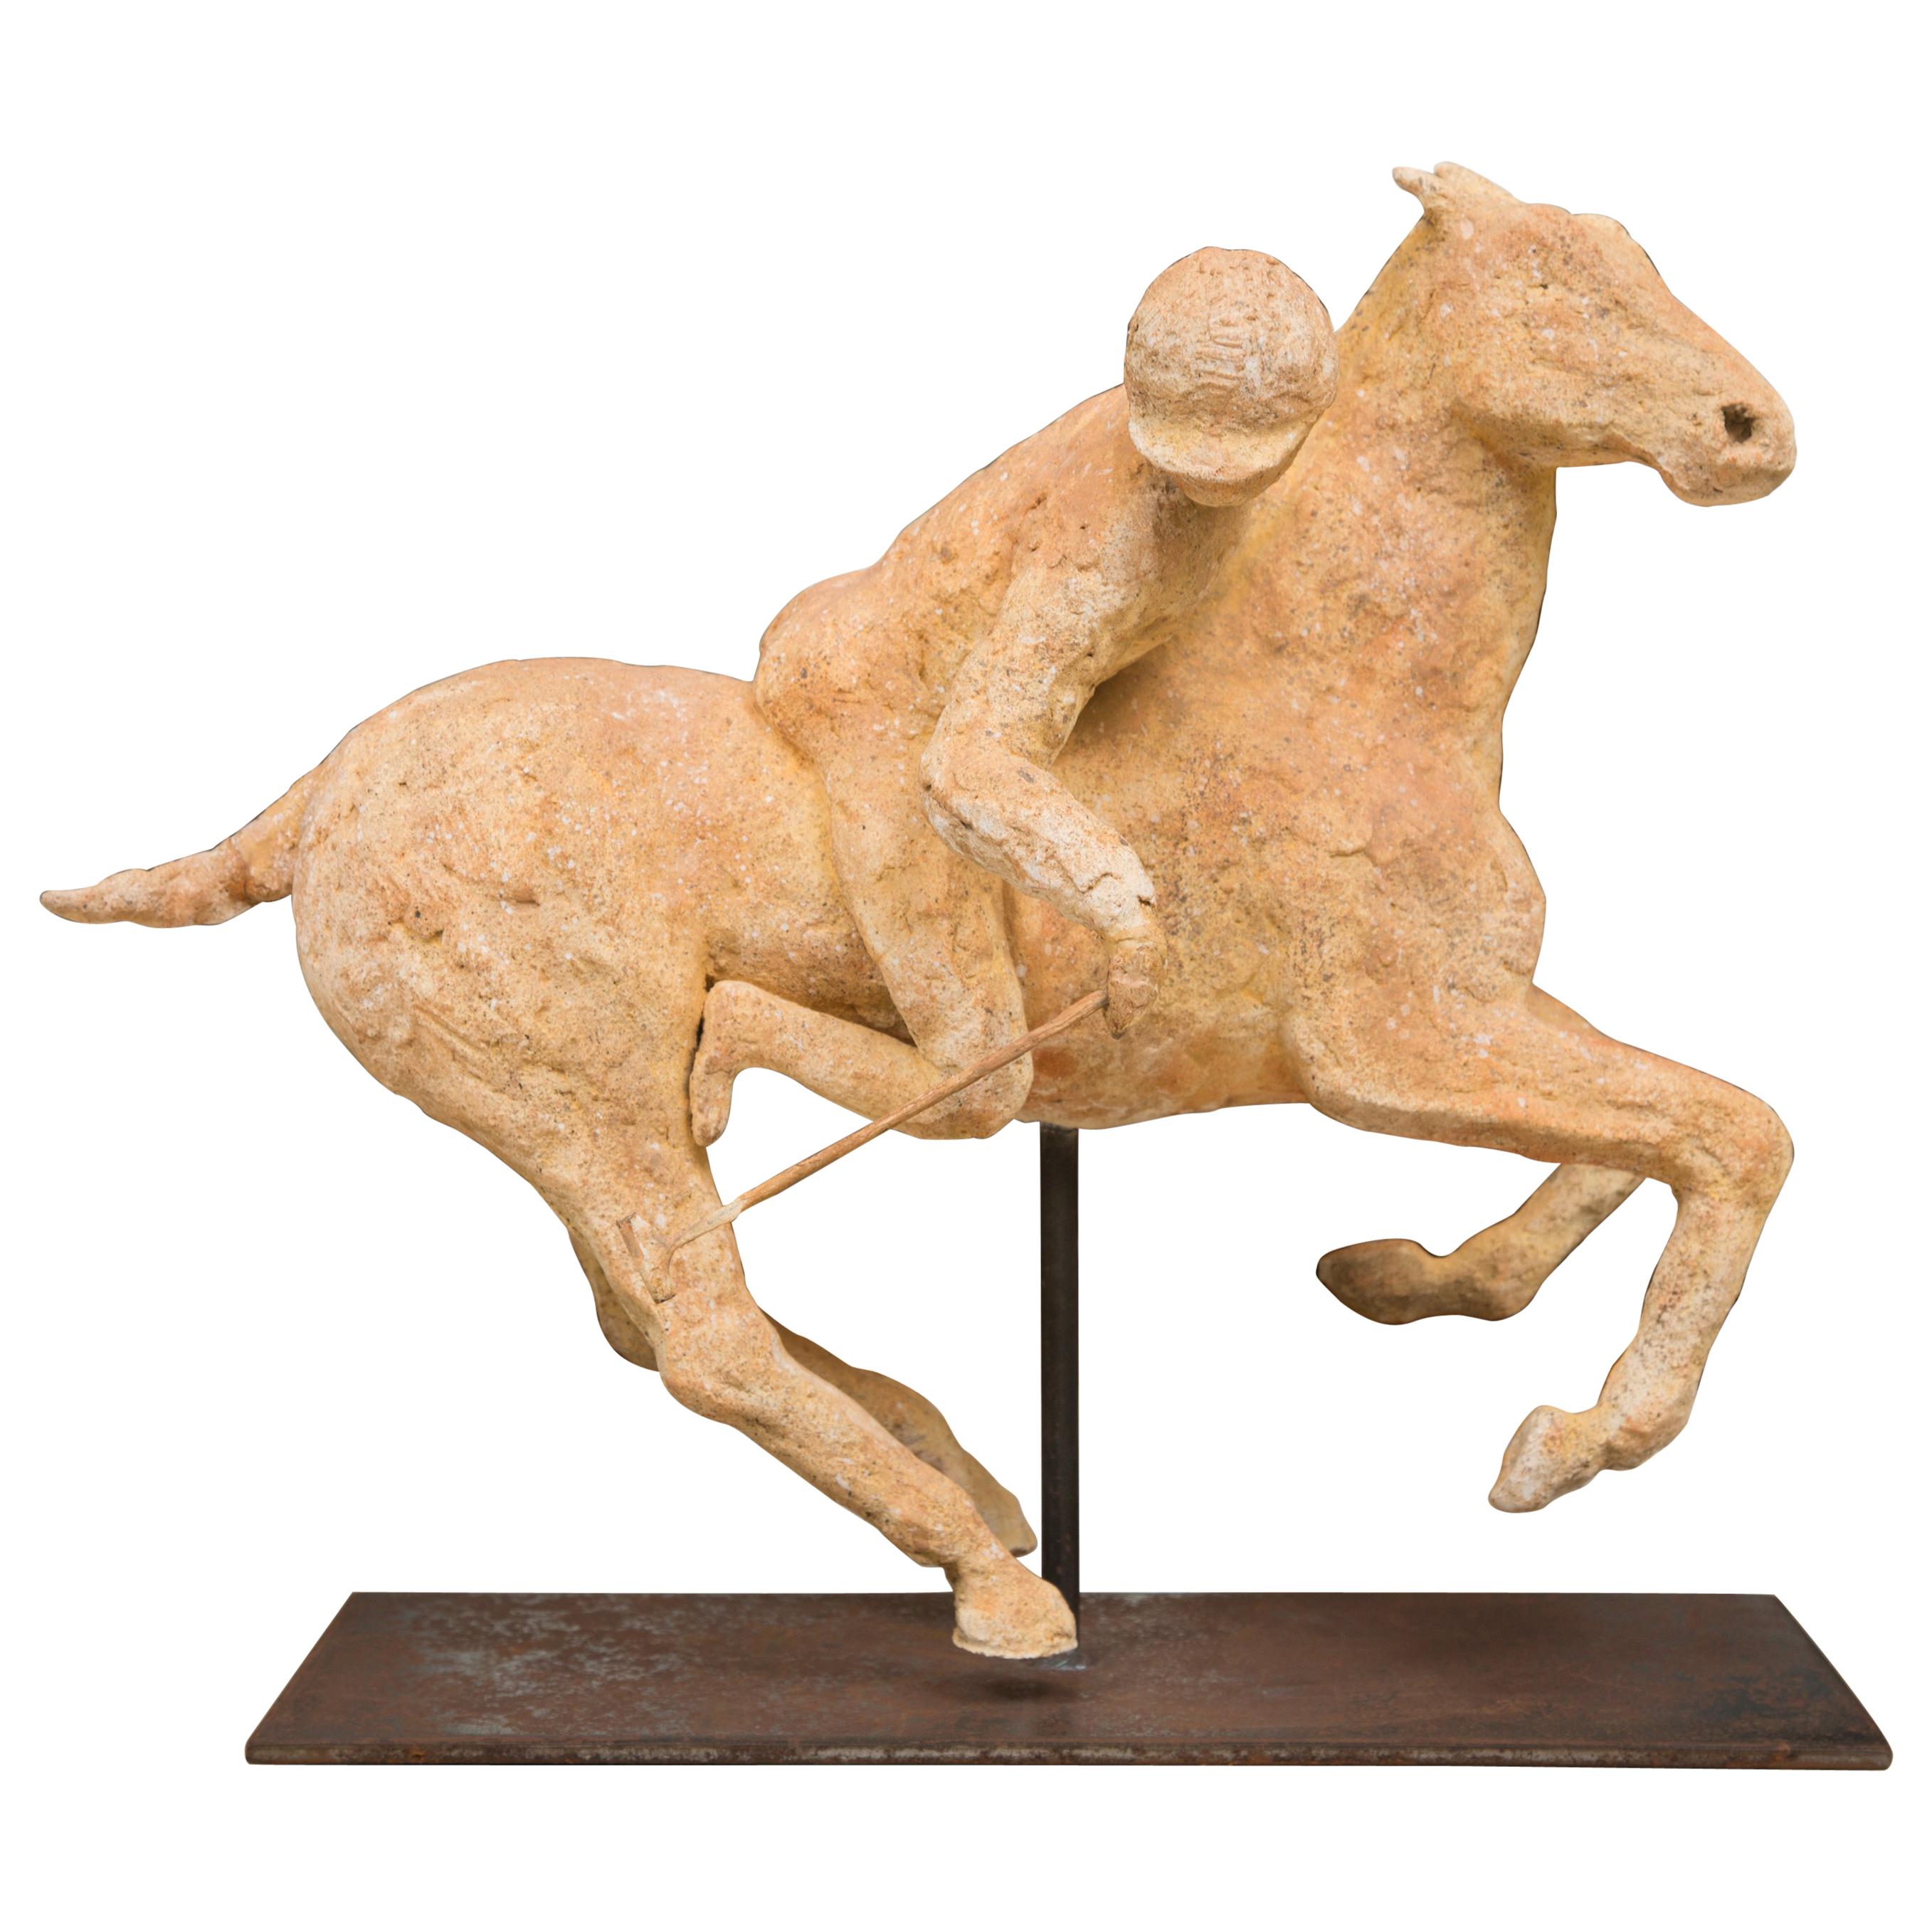 Terracotta Polo Player on a horse mounted on a Metal Stand by "Lara" For Sale